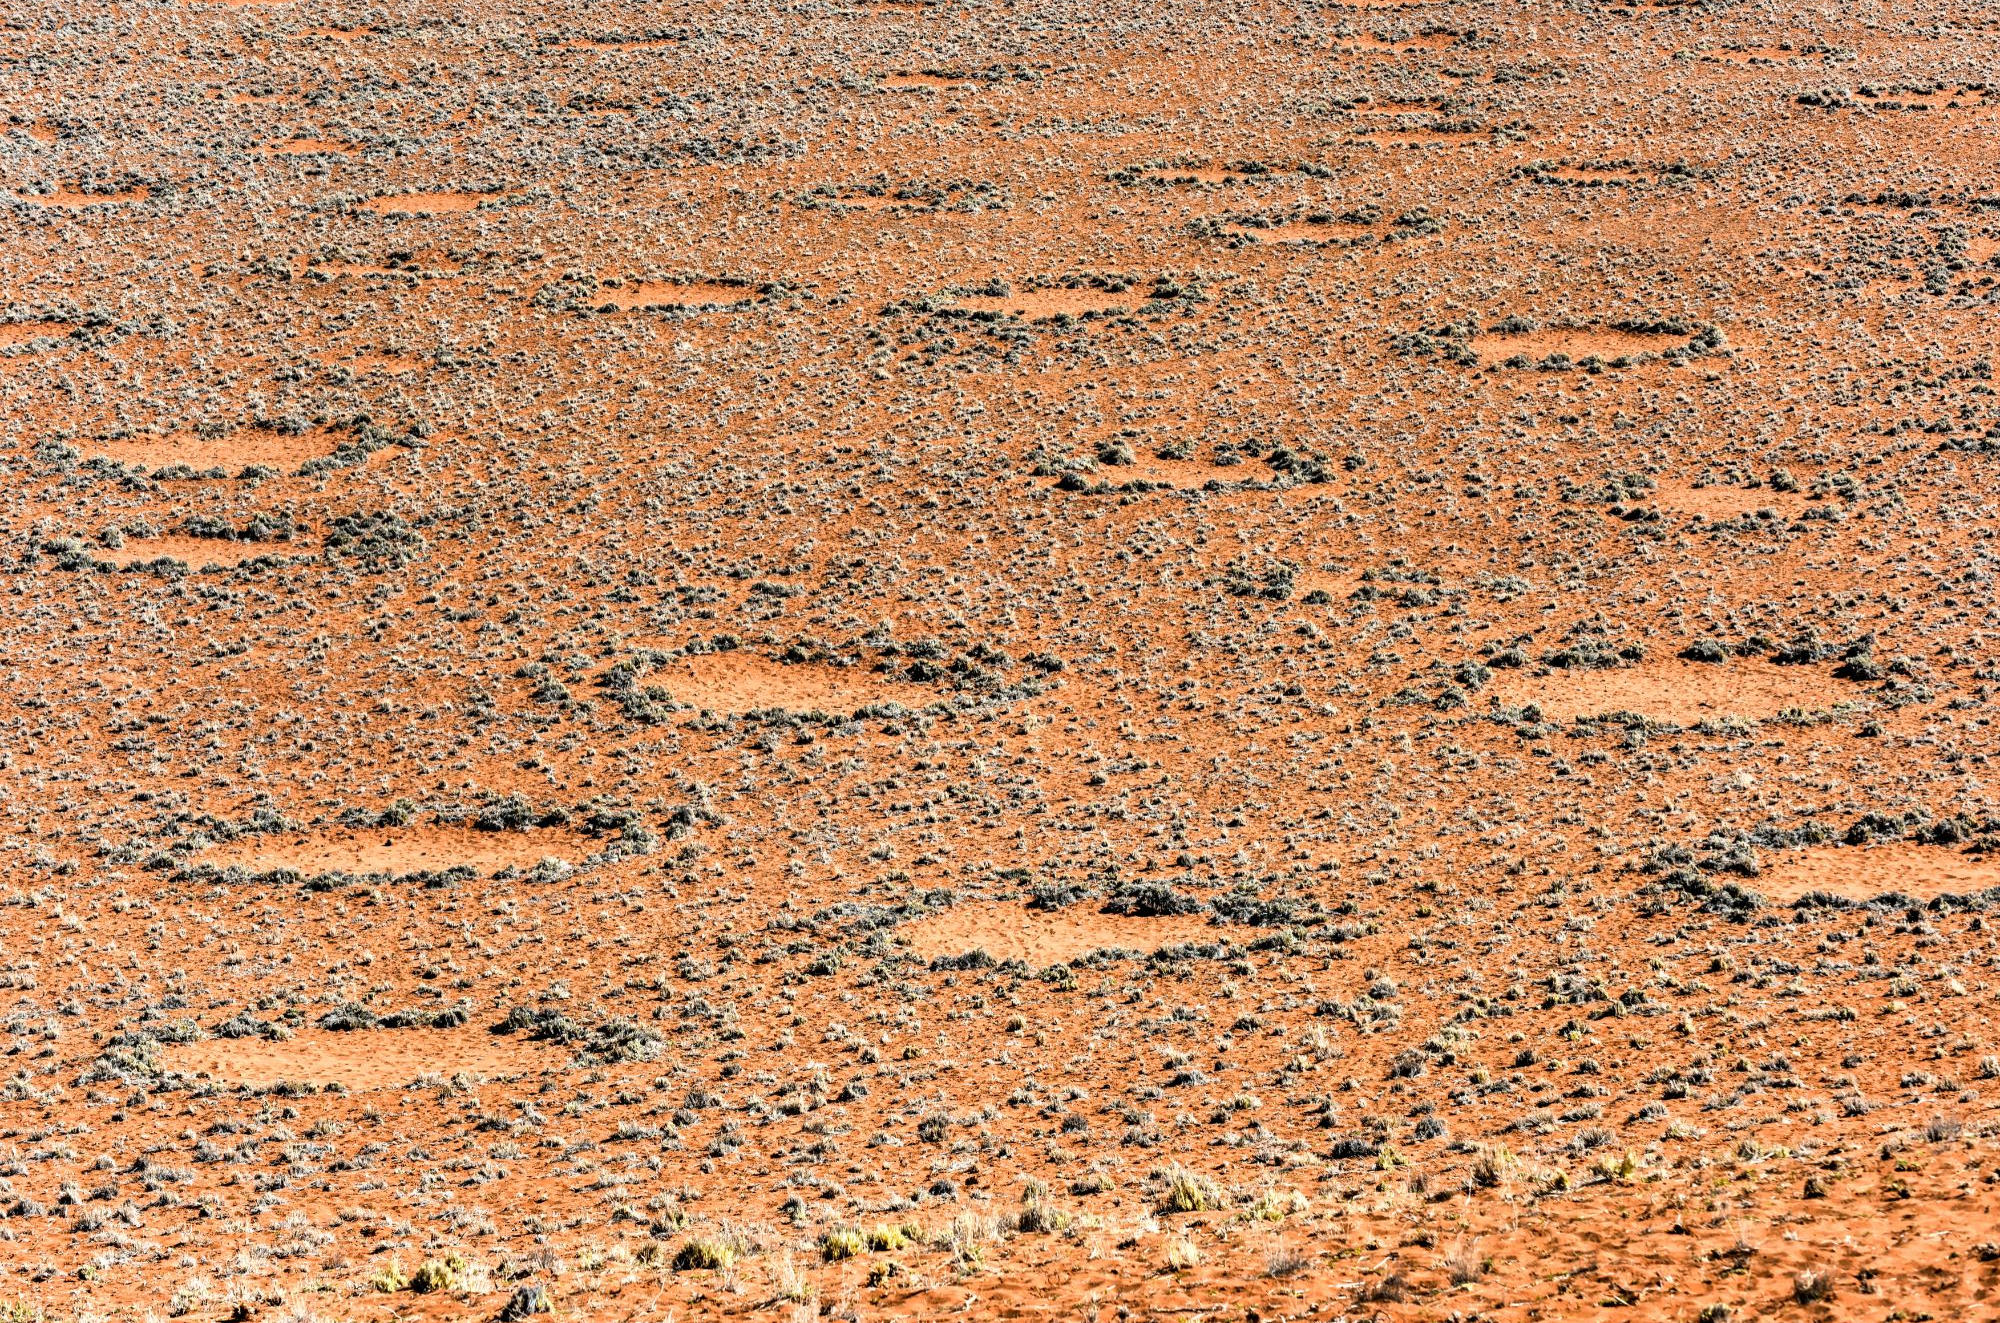 Fairy circles: Plant water stress causes Namibia's gaps in grass